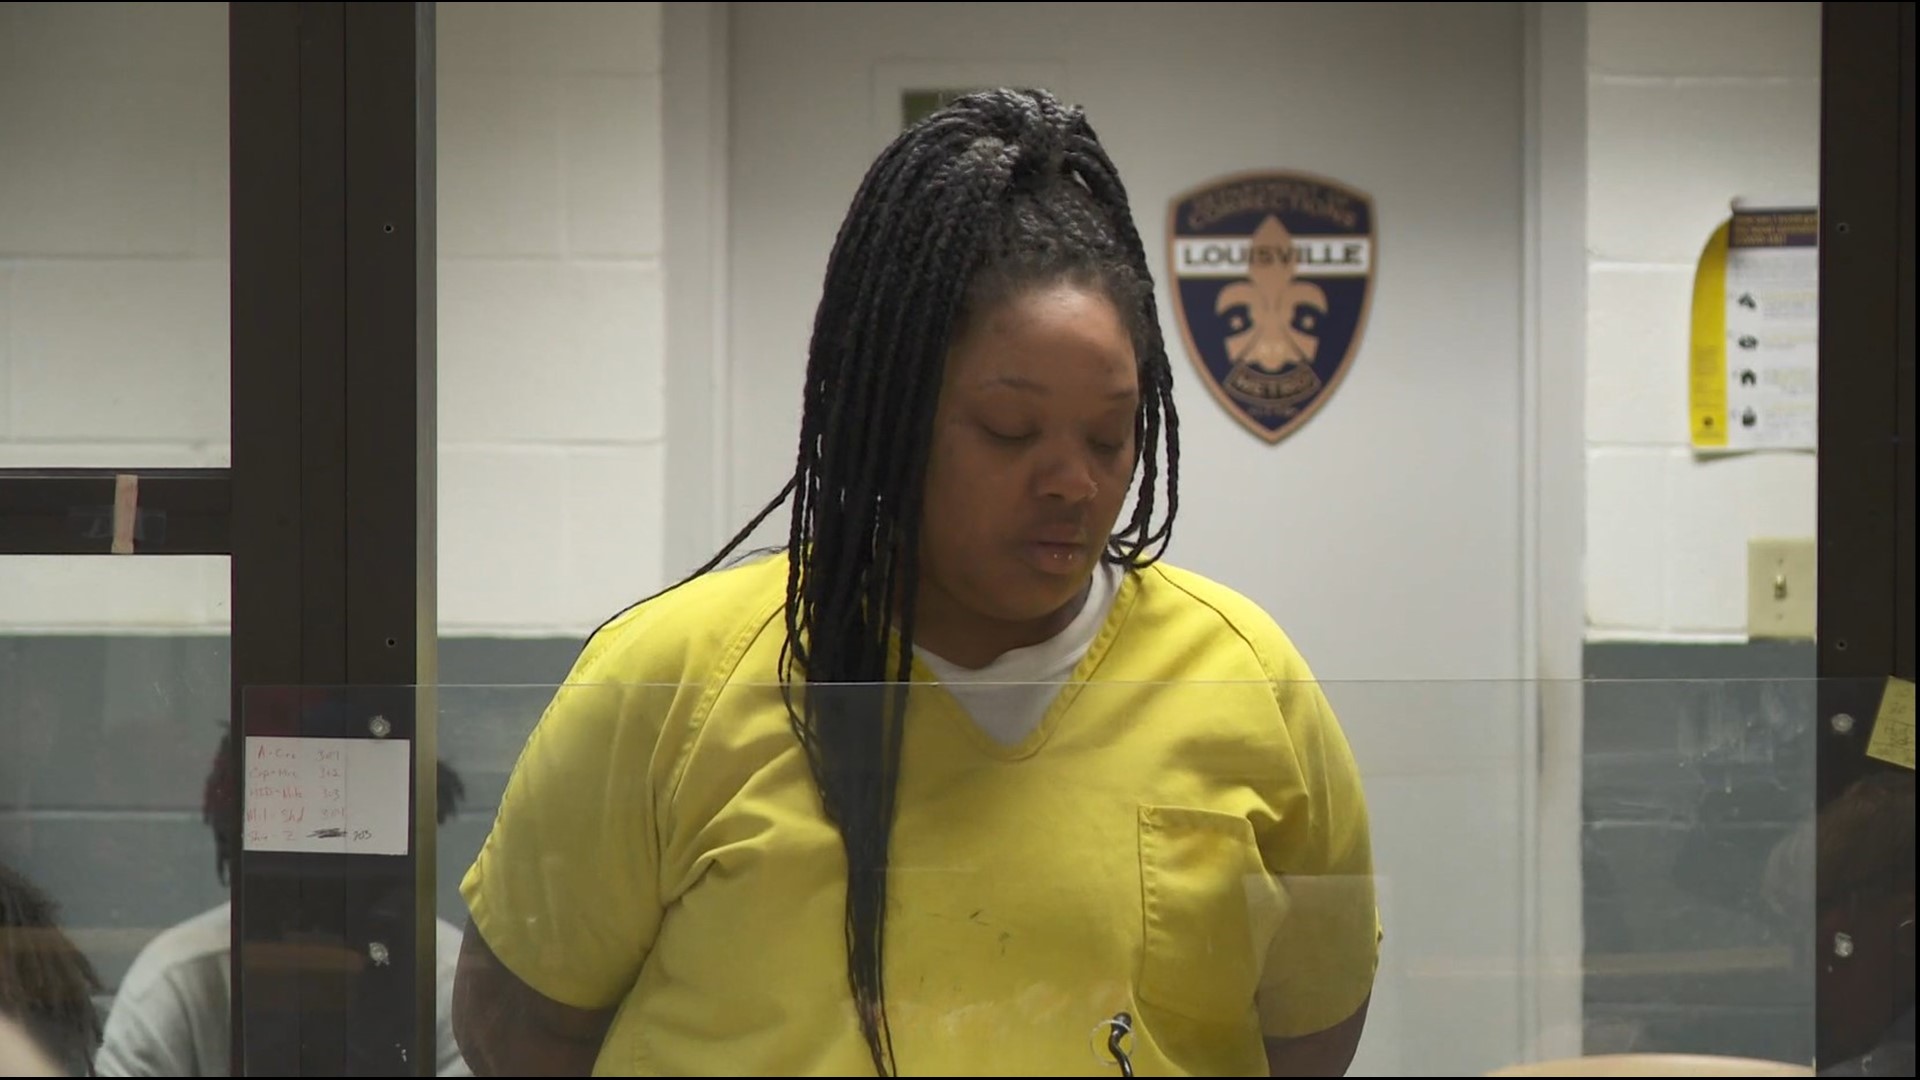 Chelynda Howlett has been arrested 20 times since 2015 and has 19 charges dating before that, court documents show.